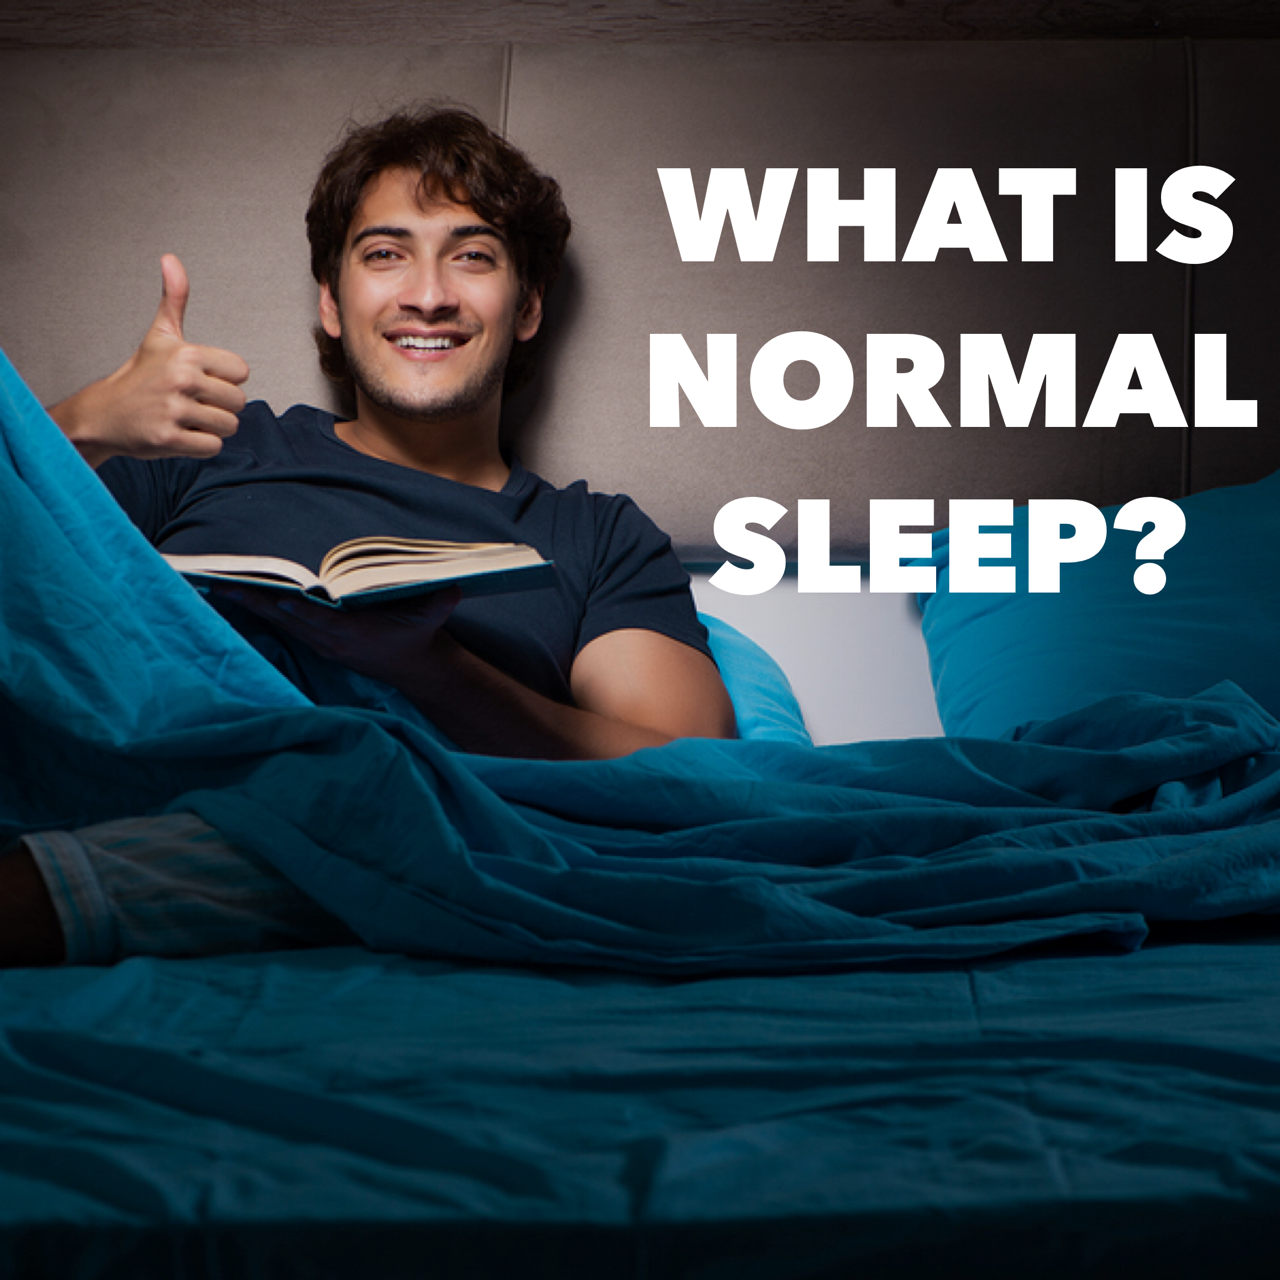 What is Normal Sleep?